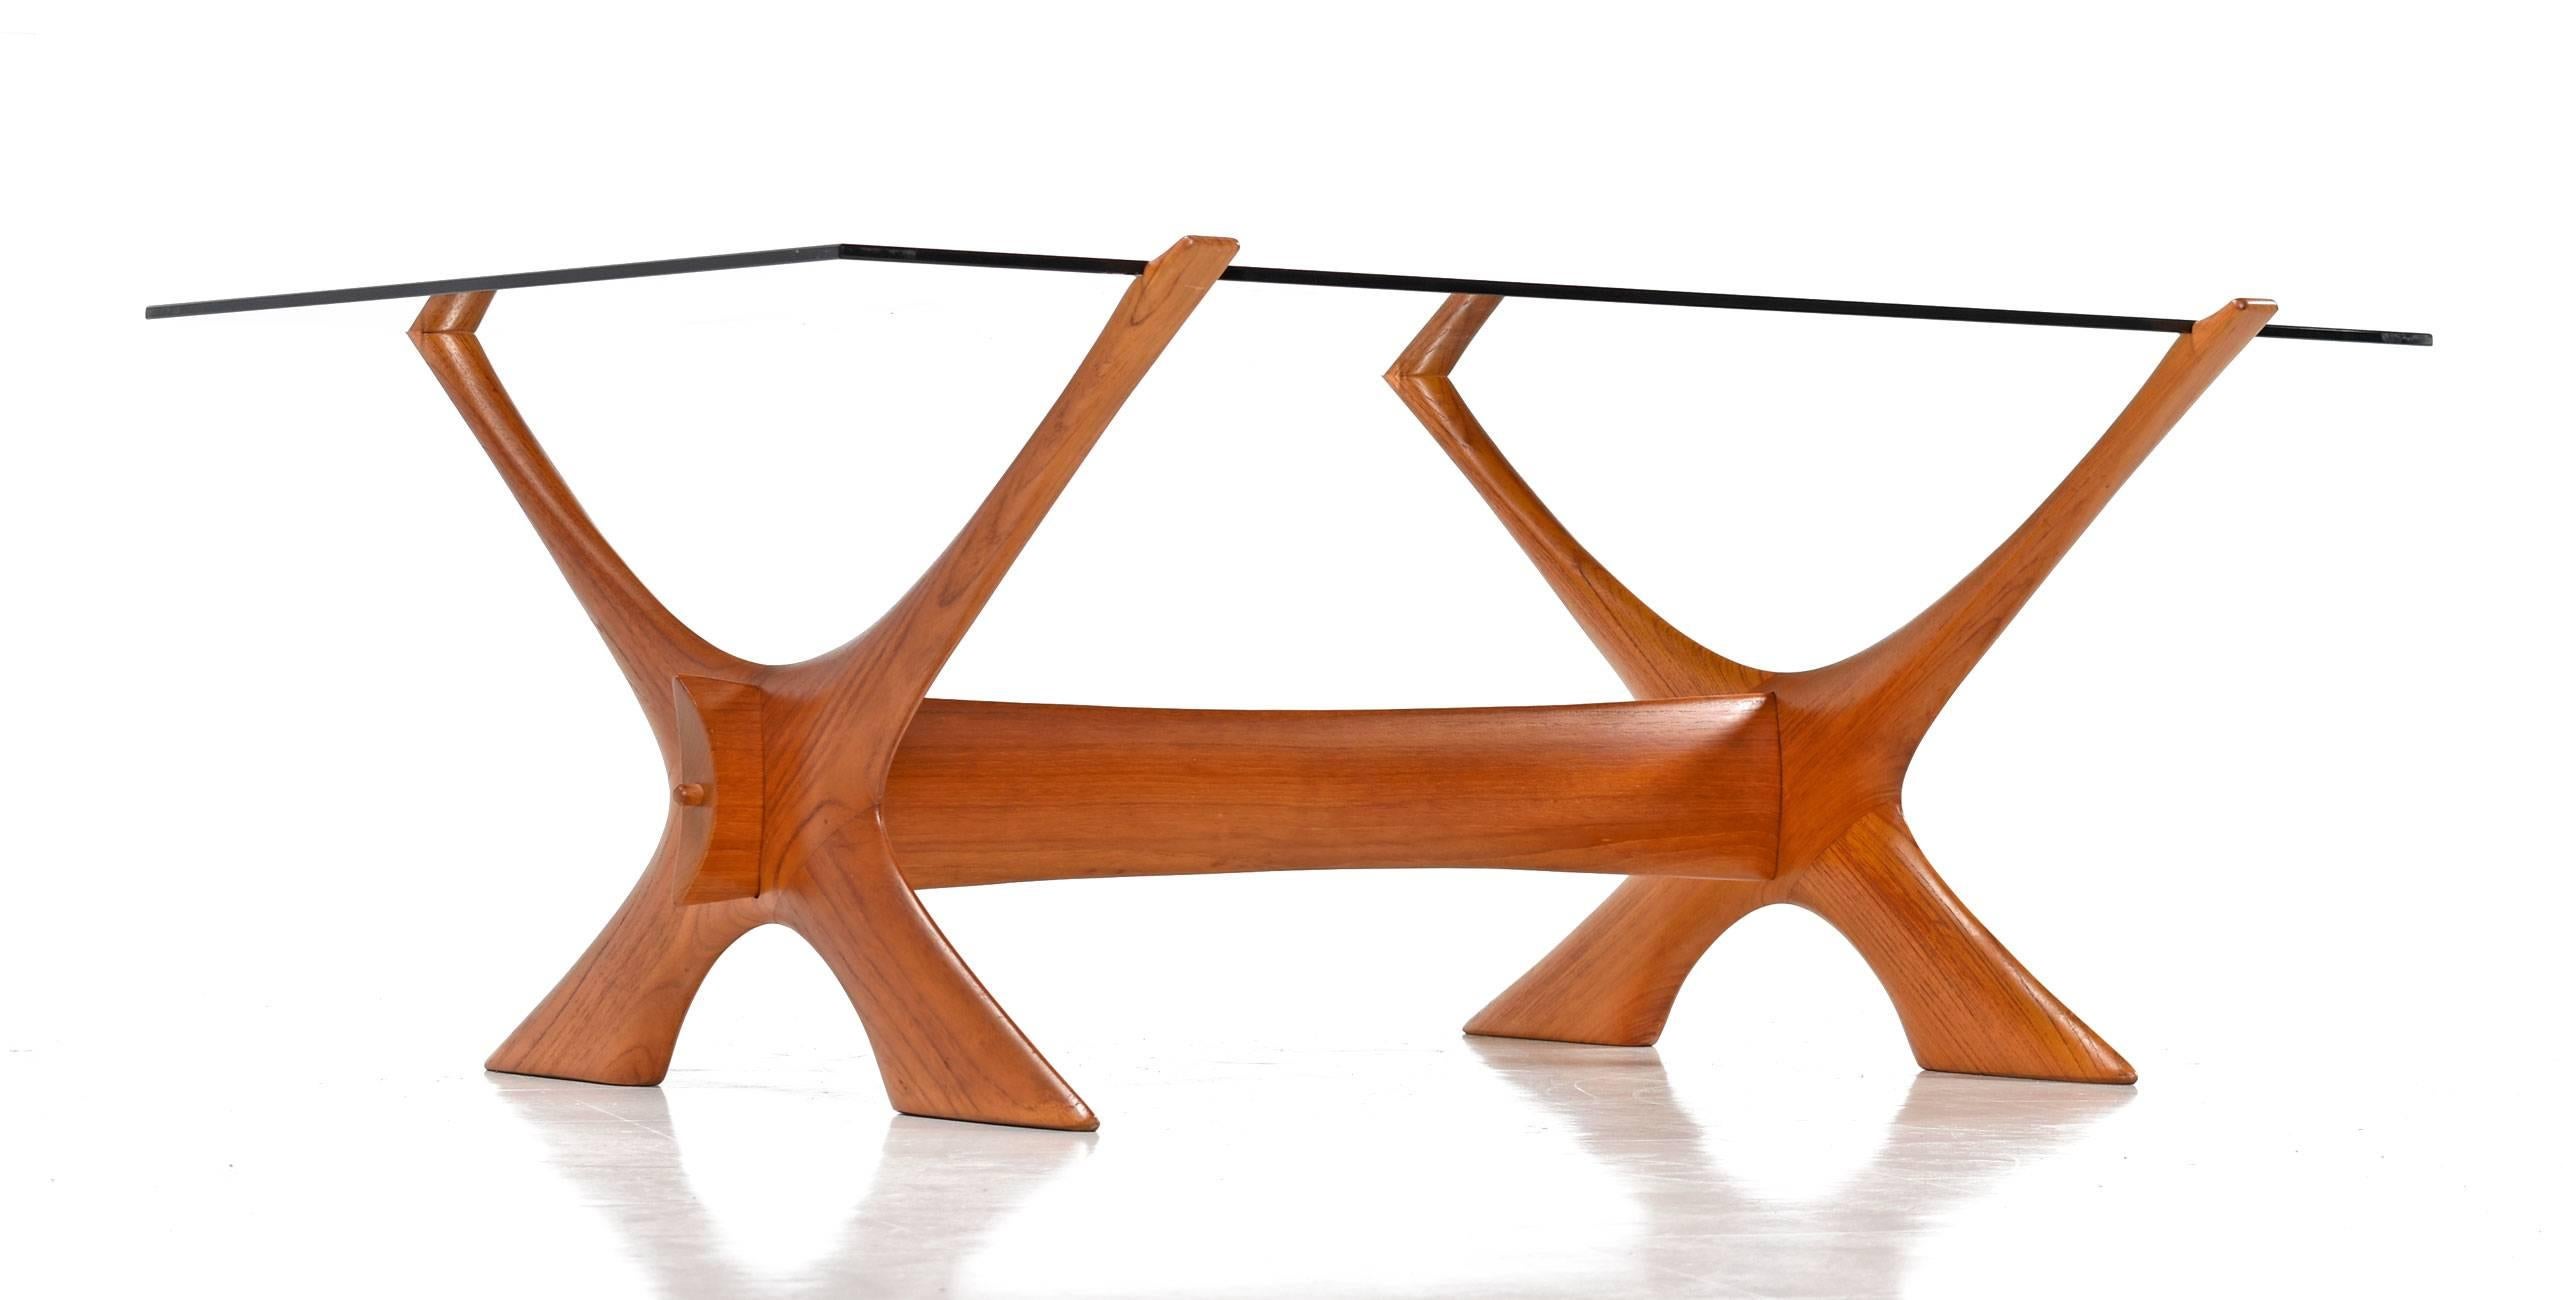 Beautiful and iconic condor coffee table designed by Fredrik Schriever-Abeln for Örebro Glass of Sweden in the 1960s. The timeless design features a carved solid teak X base, with notches at the ends which support and hold a thick smoked glass